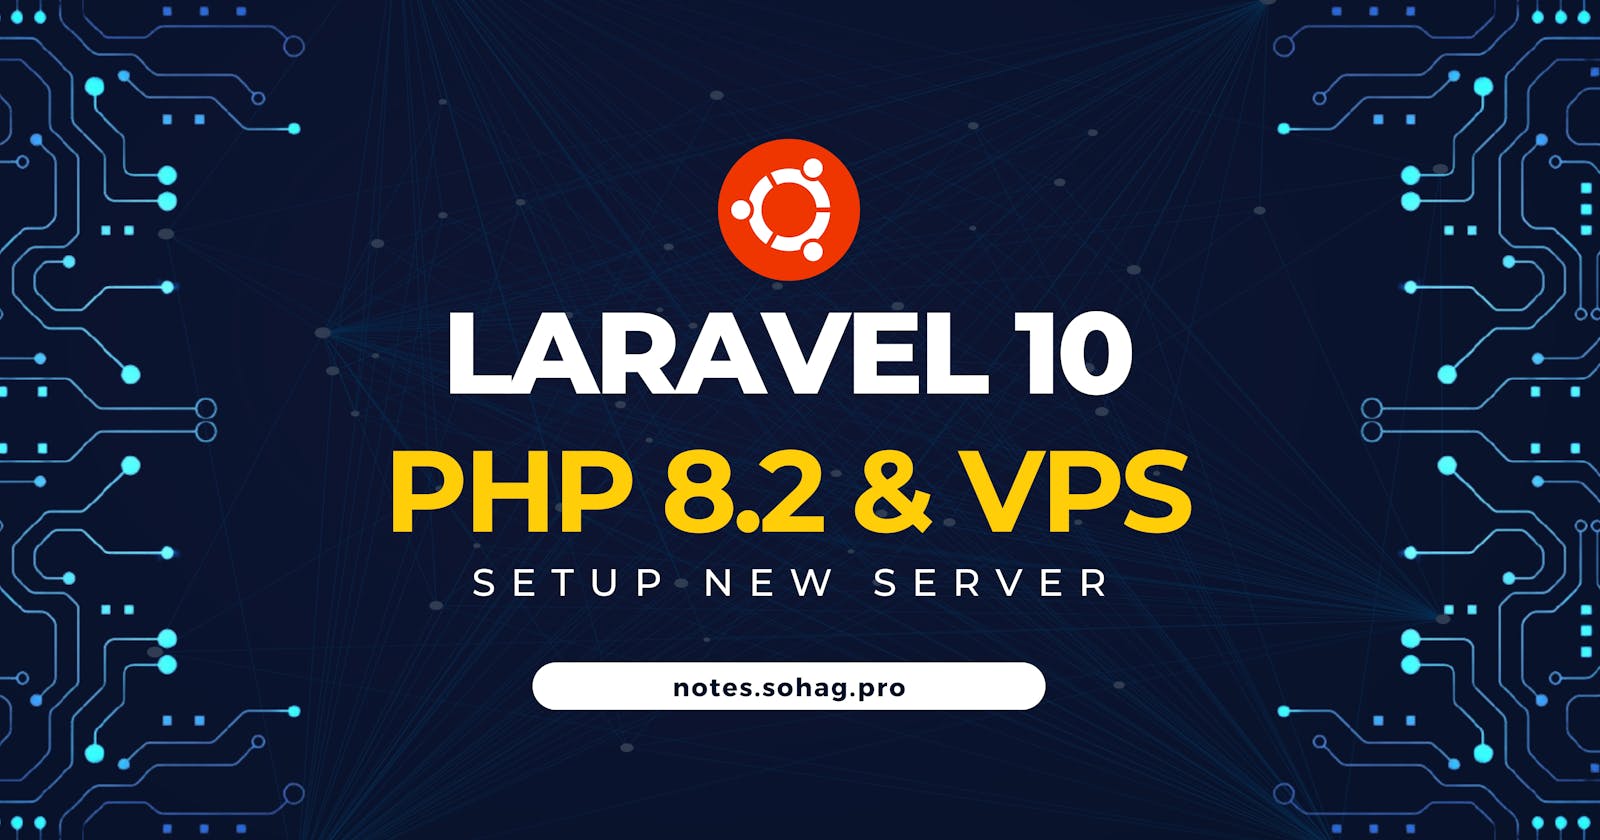 Step by Step Guide to Setting Up Your Ubuntu 22 VPS for Laravel 10 and PHP 8.2